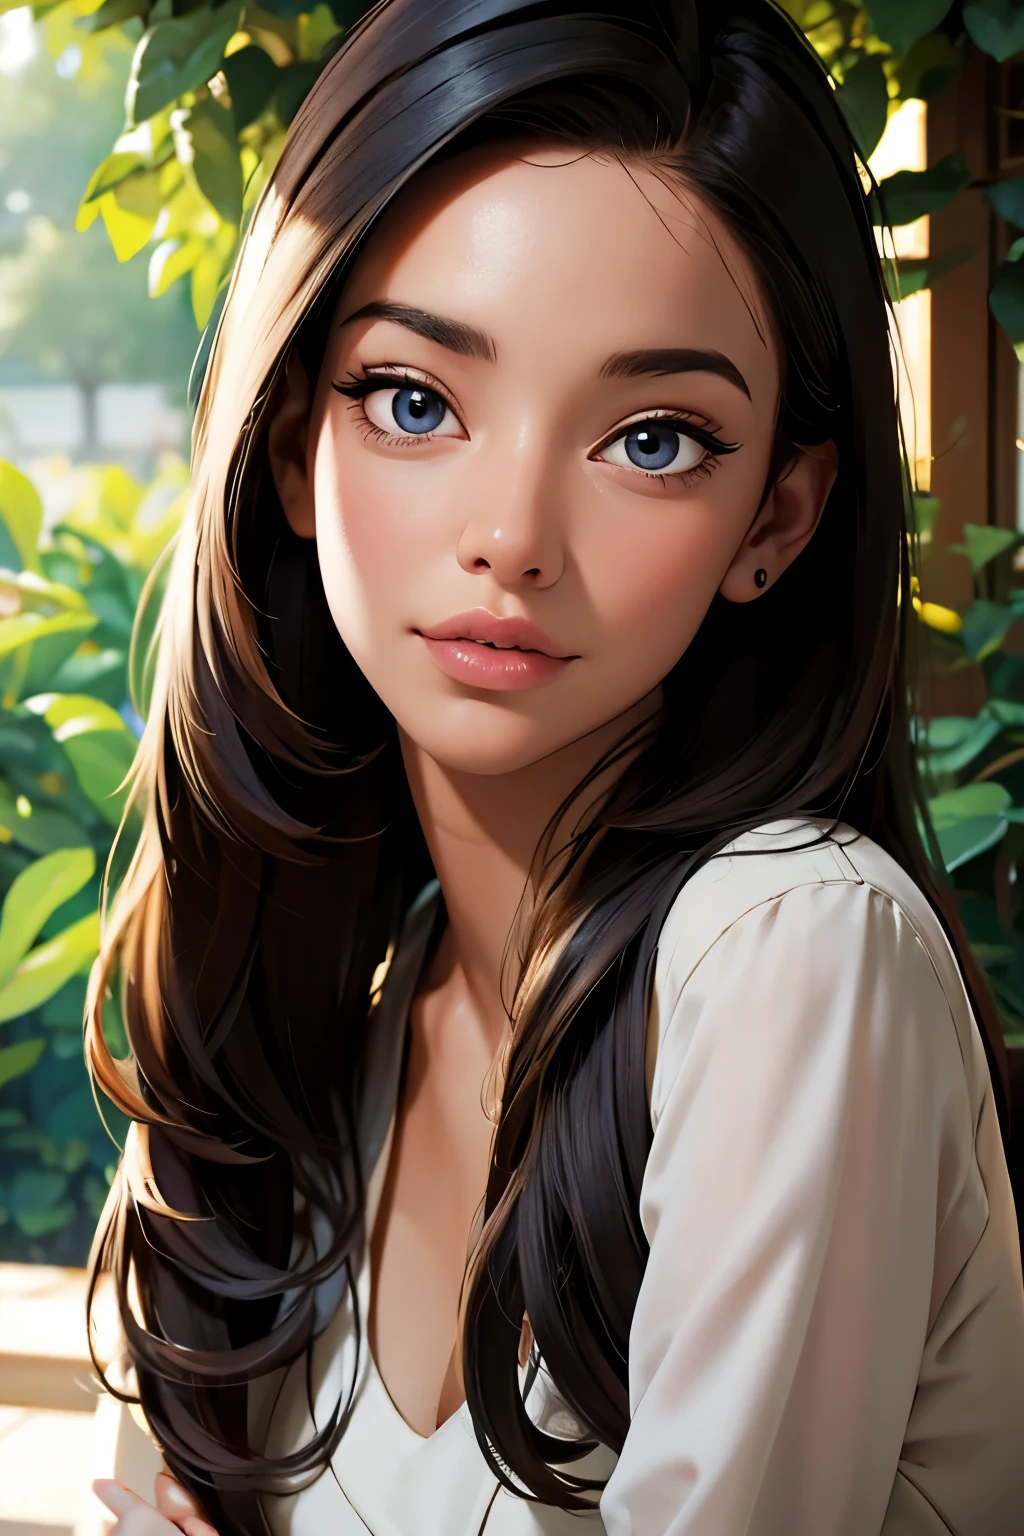 (best quality,4k,8k,highres,masterpiece:1.2),ultra-detailed,(realistic,photorealistic,photo-realistic:1.37),A girl in a garden,portraits,beautiful detailed eyes,beautiful detailed lips,extremely detailed eyes and face,longeyelashes,natural lighting,greenery,peaceful ambiance,flowing dress,flying hair,gentle sunlight,vivid colors,aesthetic composition,soft shadows,subtle breeze,serene expression,relaxed posture,harmonious background,dreamy atmosphere, dressed professionally, in her office, full view